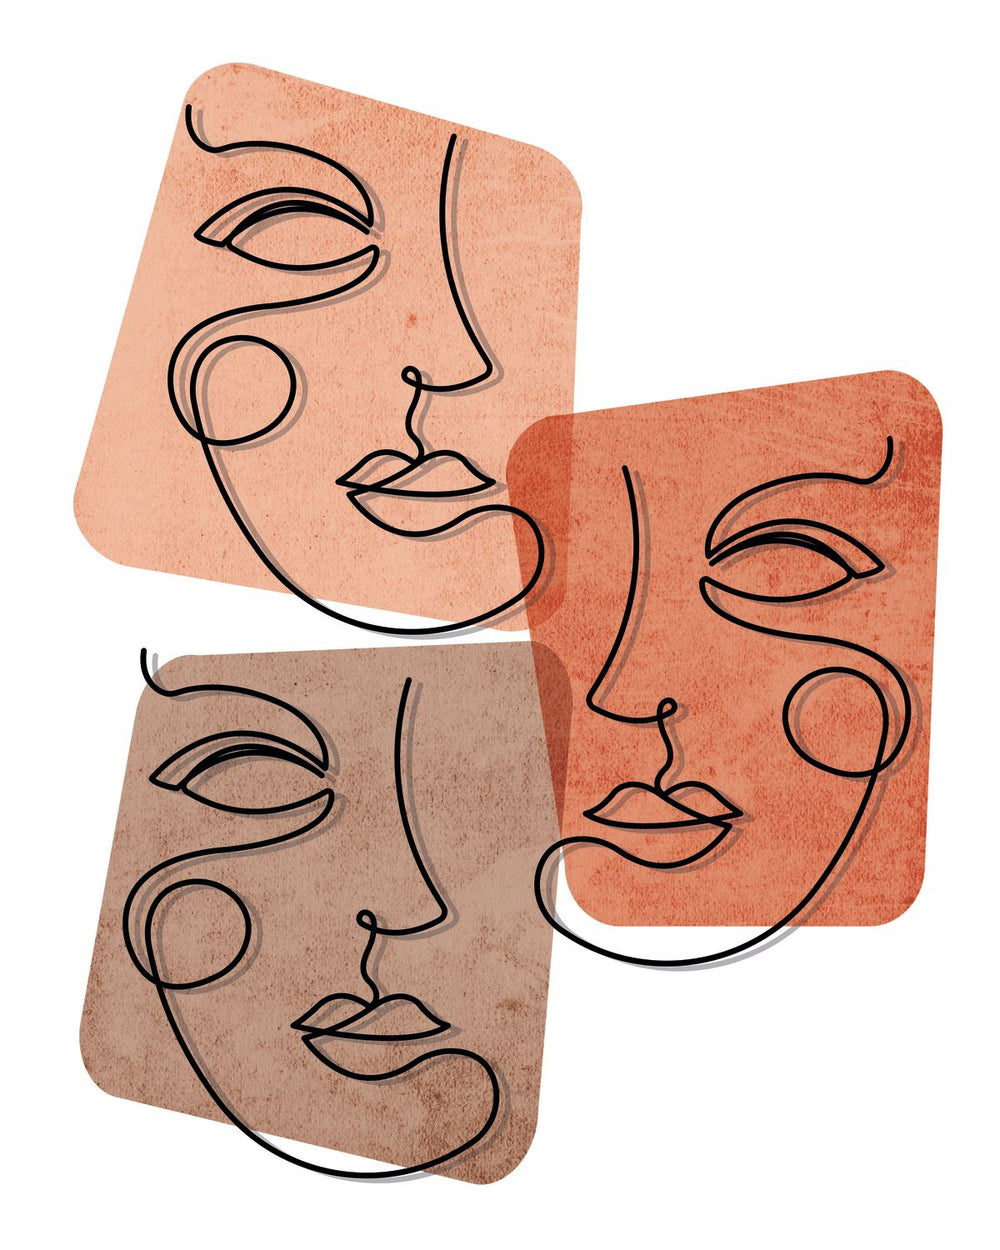 Ethnic Diversity Abstract Faces